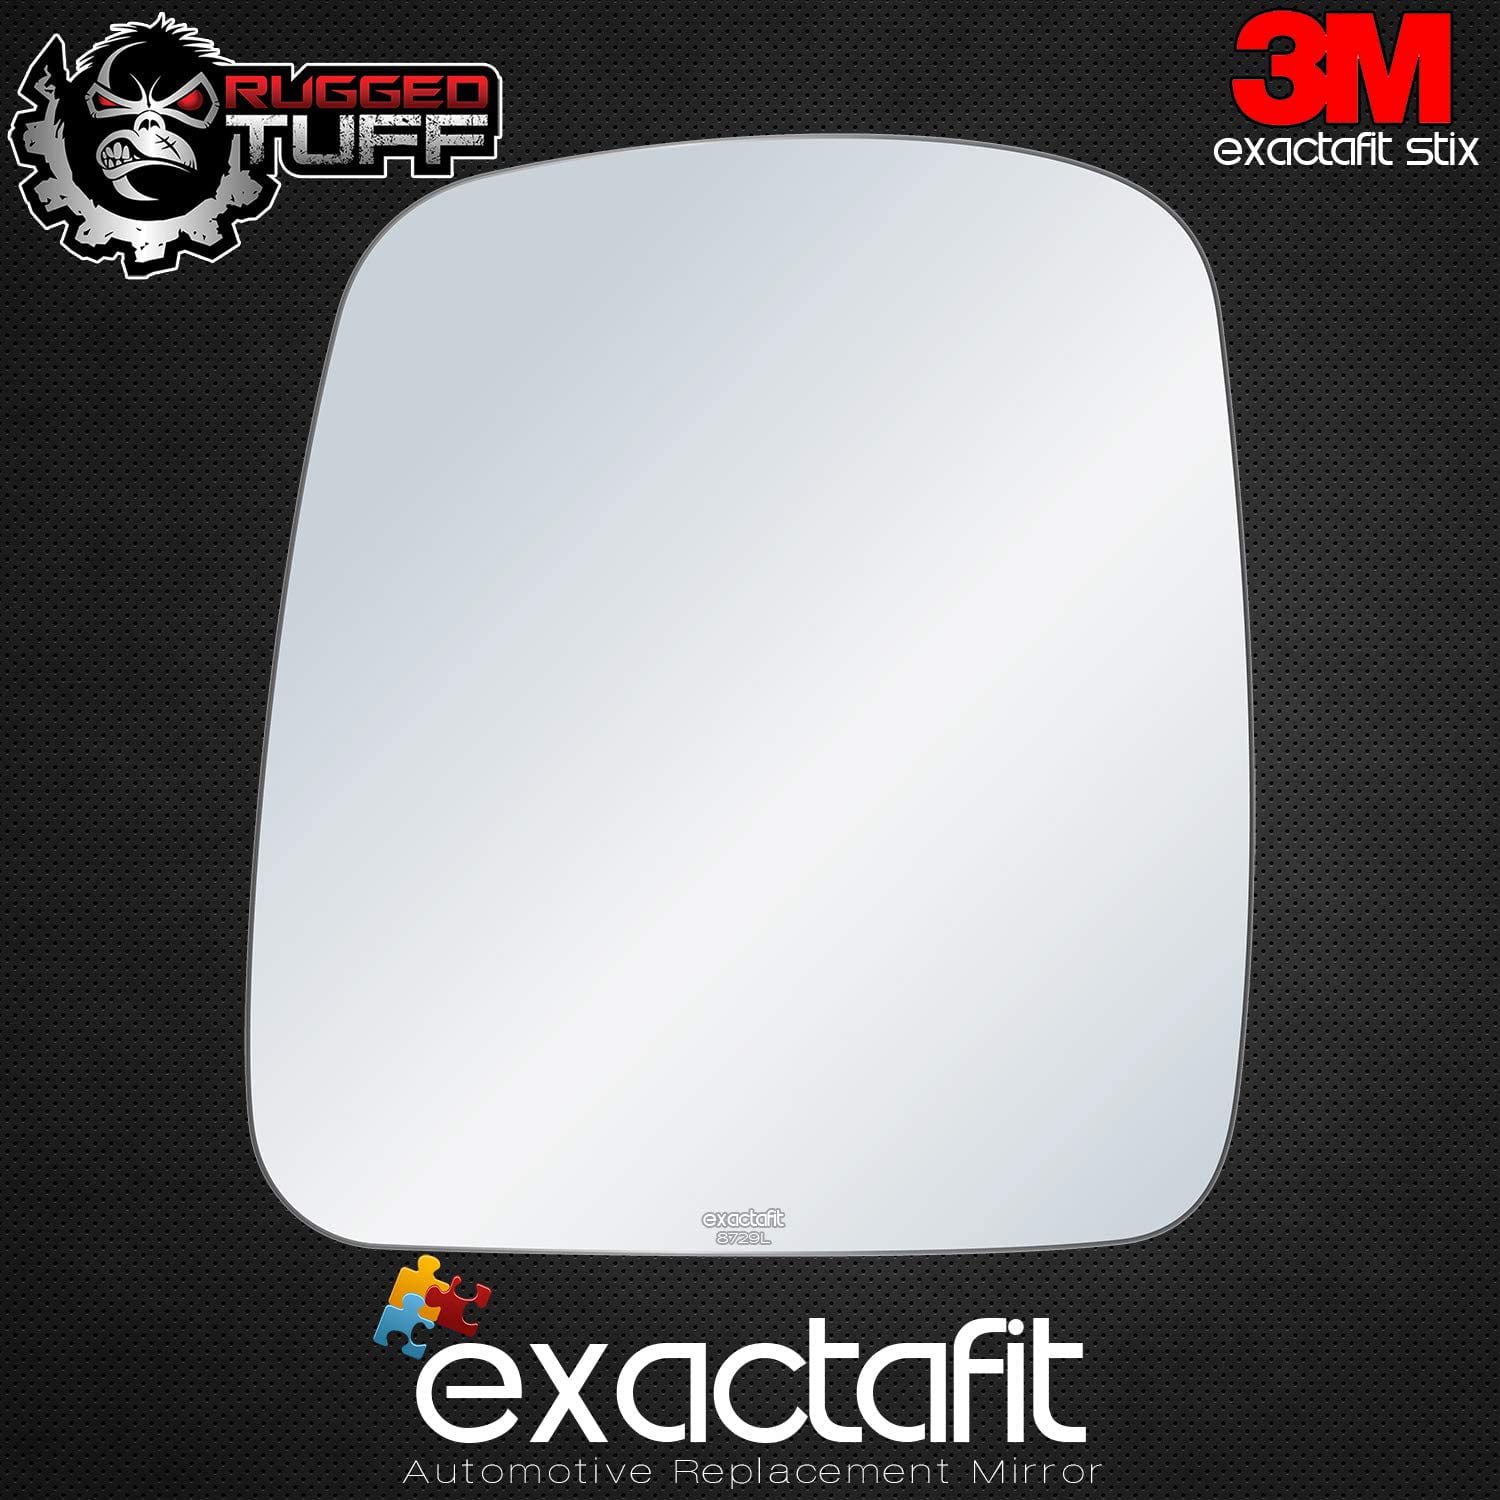 exactafit 8729L Replacement Driver Left Side Mirror Glass Flat Lens fits 03-07 Chevy GMC Savana Express 1500 2500 3500 by Rugged TUFF